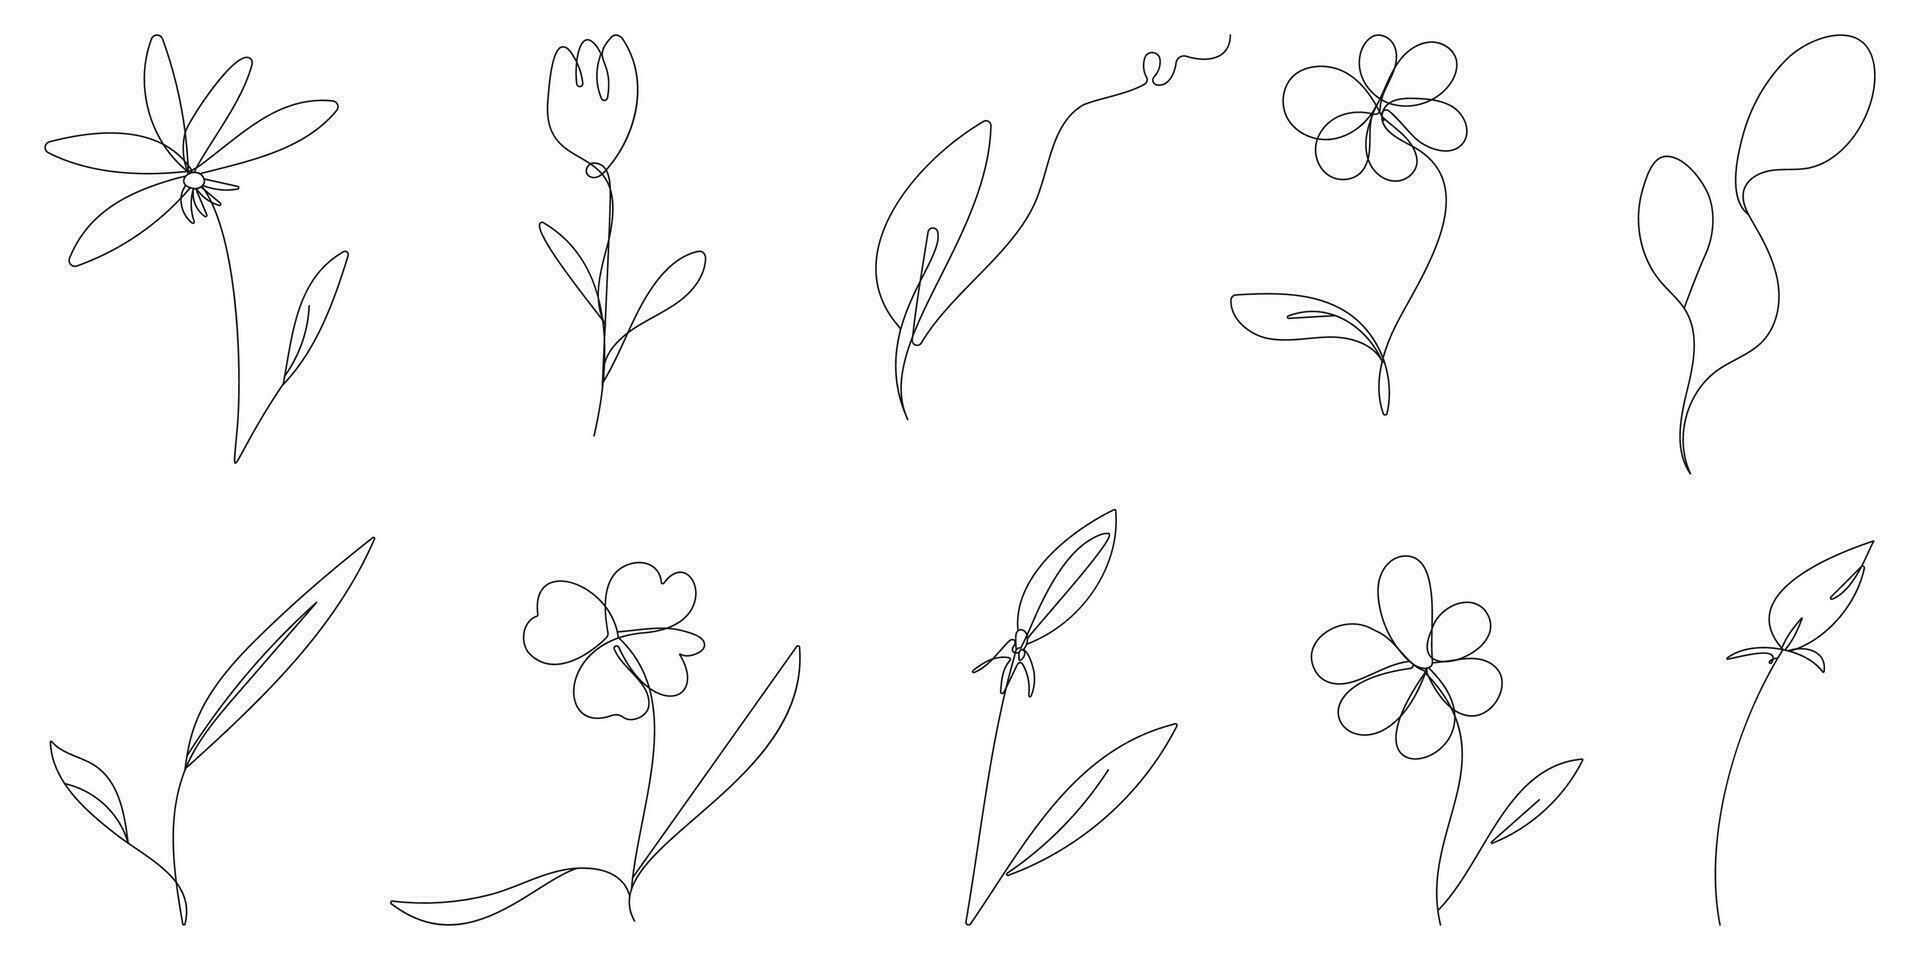 Hand Drawn Floral Doodles.Hand Drawn Floral Elements.Illustration in hand drawn line style.Vector elements for wedding design.Trendy for tattoo design.Vector elements for logo design vector